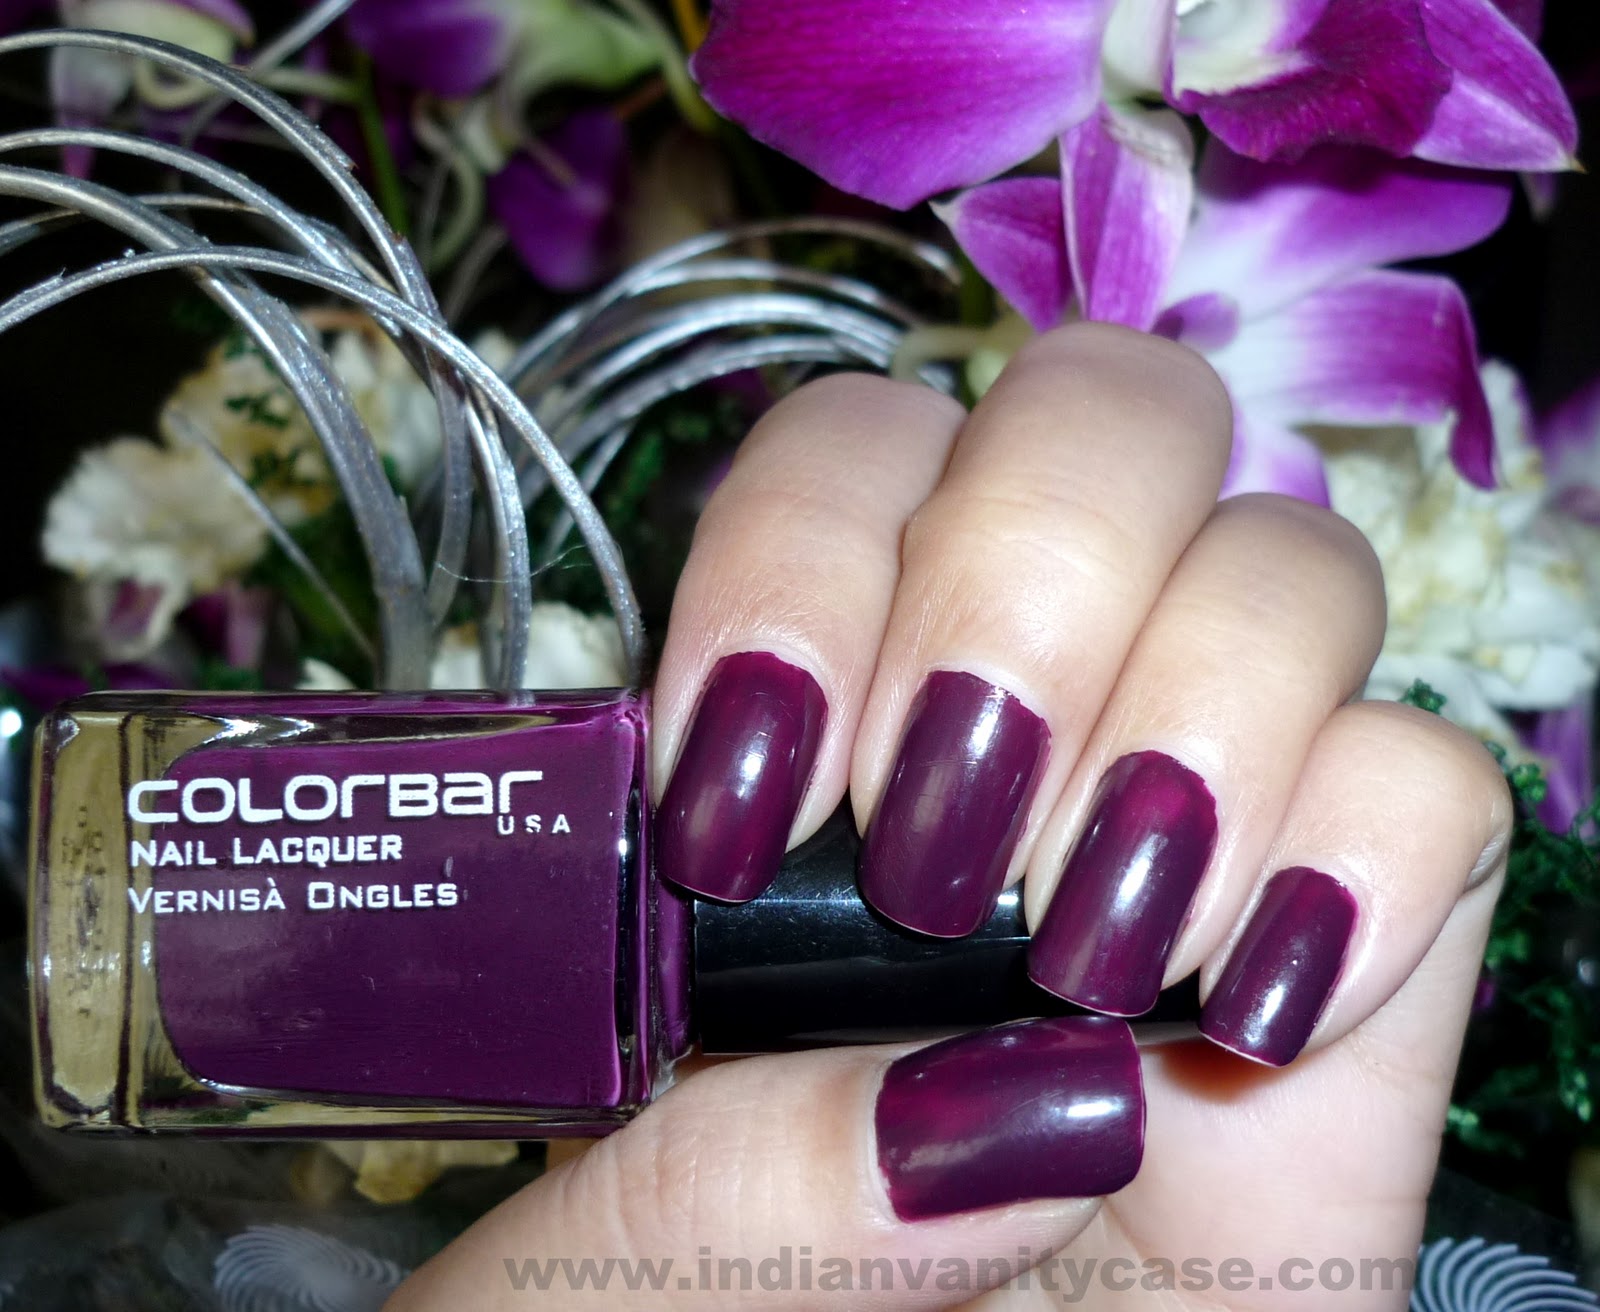 COLORBAR 1001 SHADES Of love nailpaint ||Review & Swatch || 💅 - YouTube